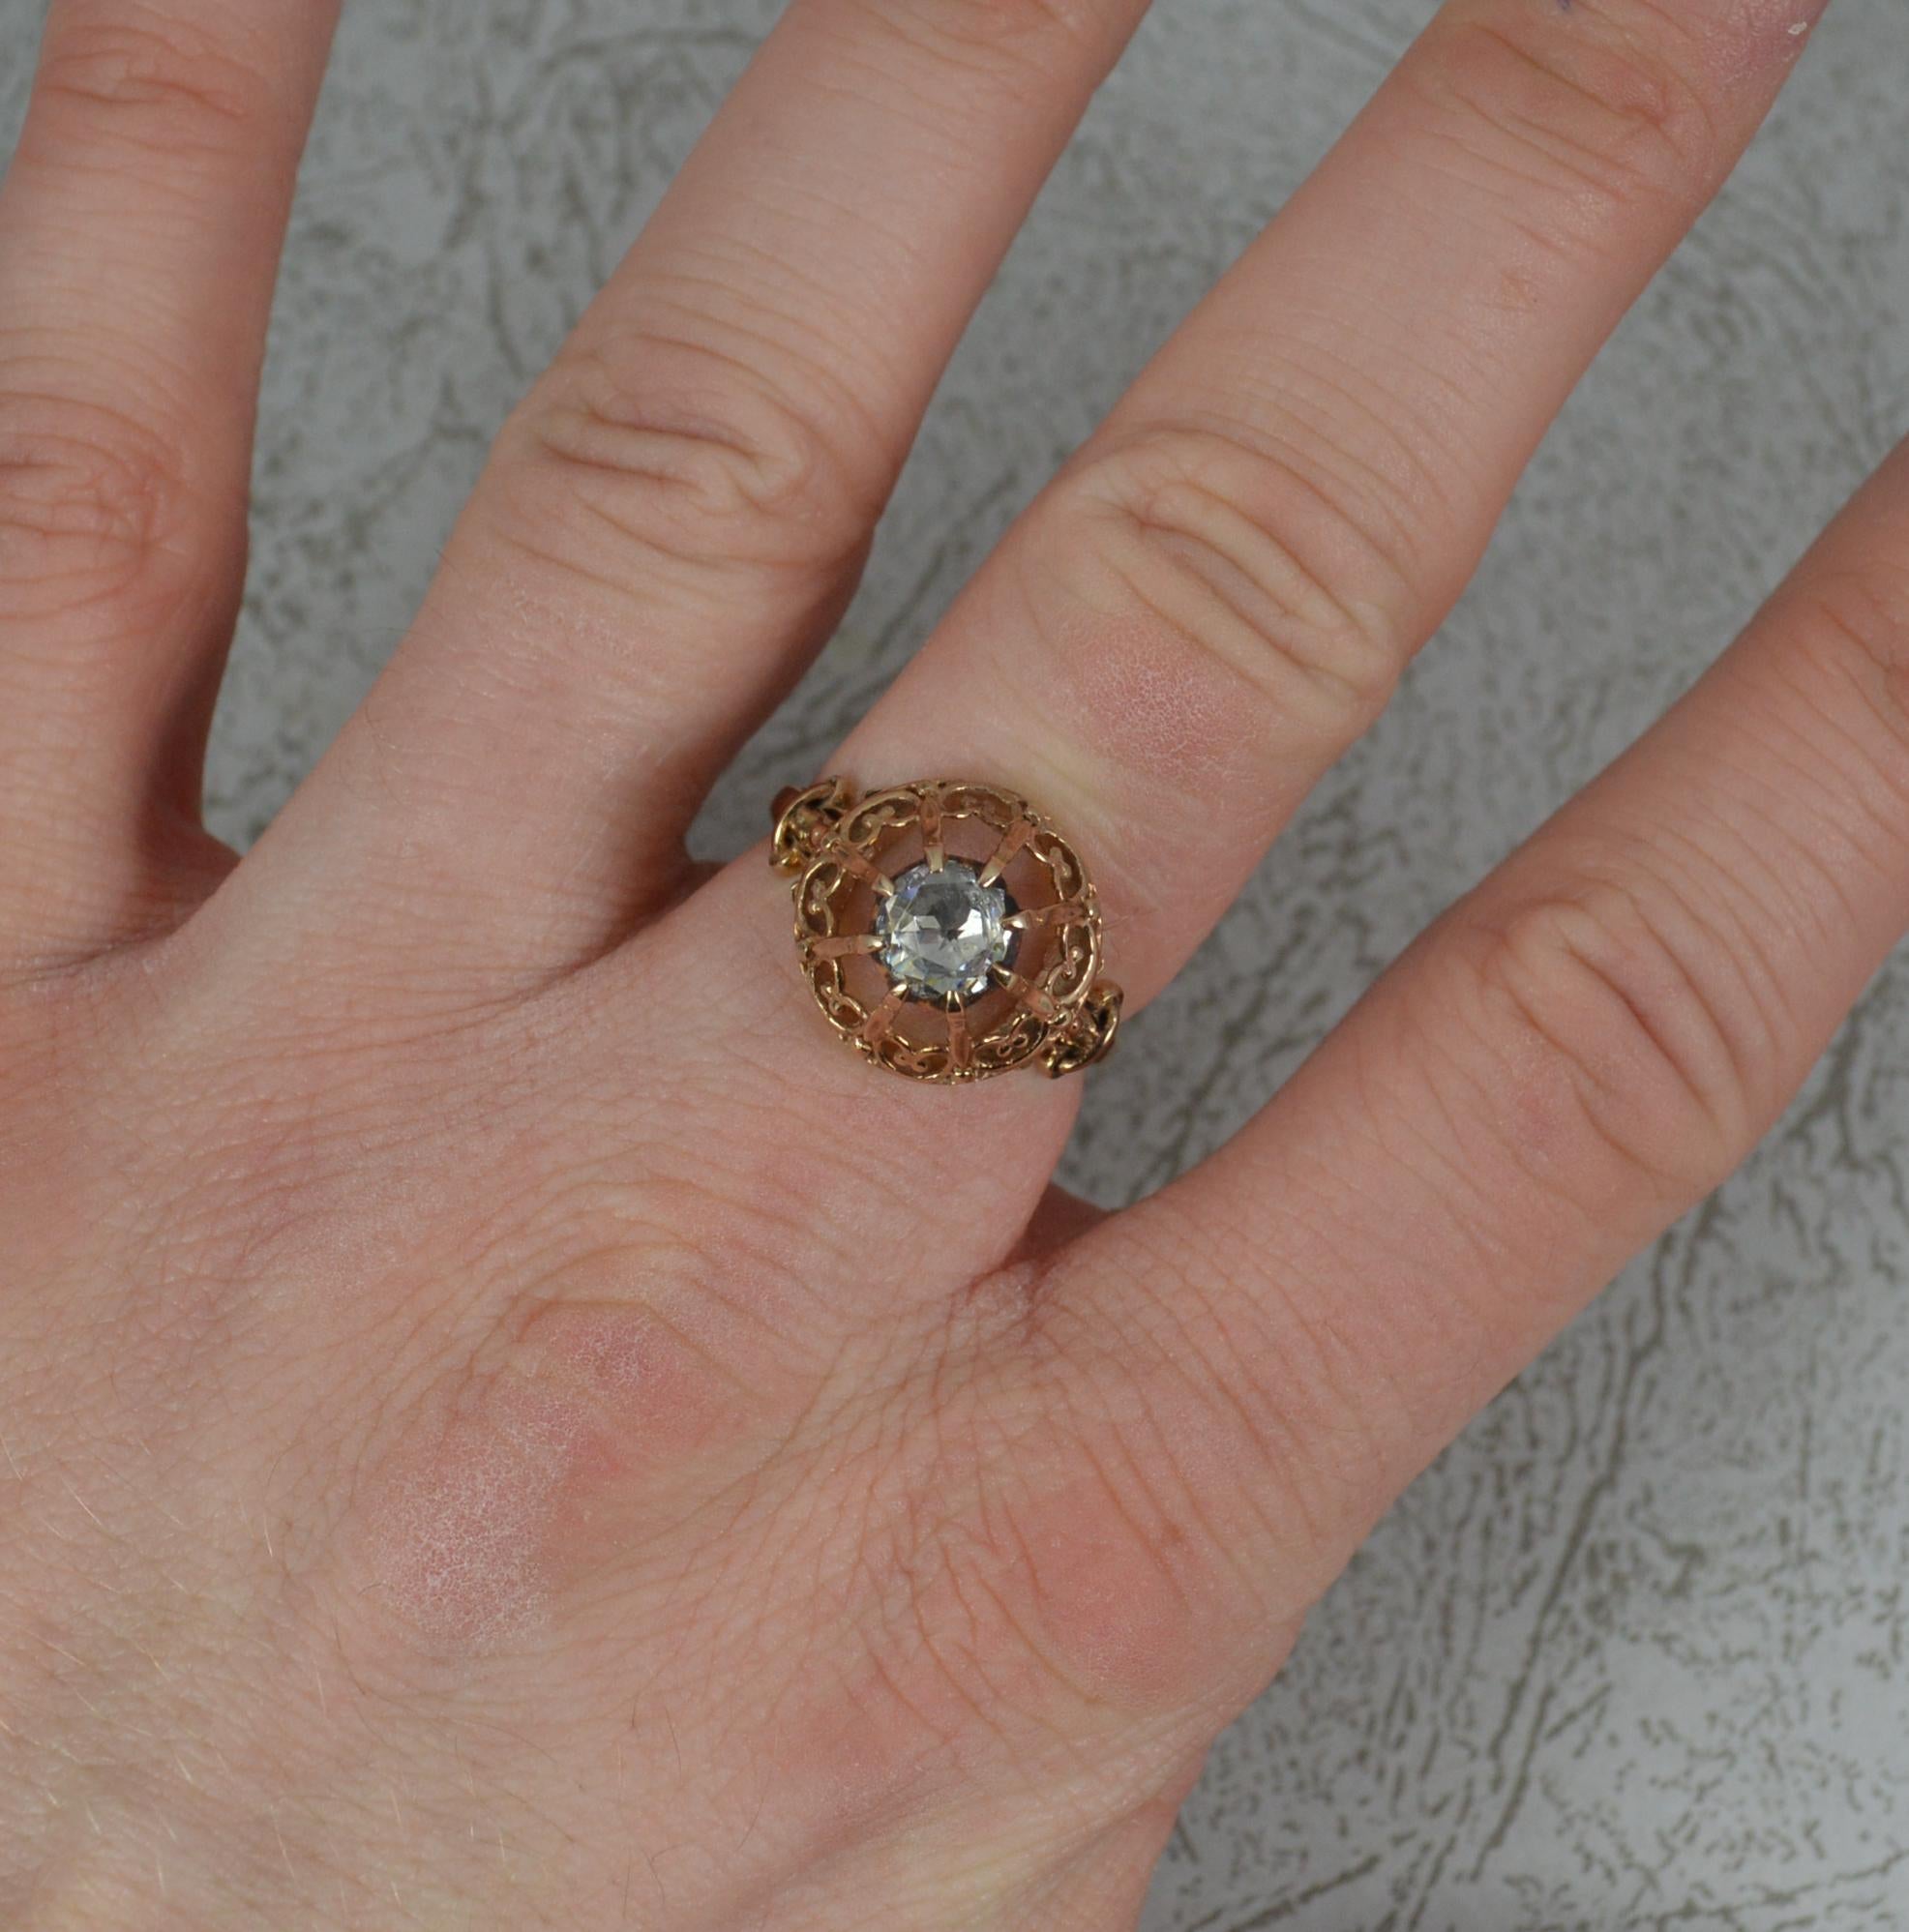 A superb late Victorian period ring.
Solid 14 carat rose gold example.
Set with a single natural, rose cut diamond, 5.8mm diameter, to spread approx 0.8 carats. Set into a closed, foiled, silver bezel setting.
Protruding 9mm off the